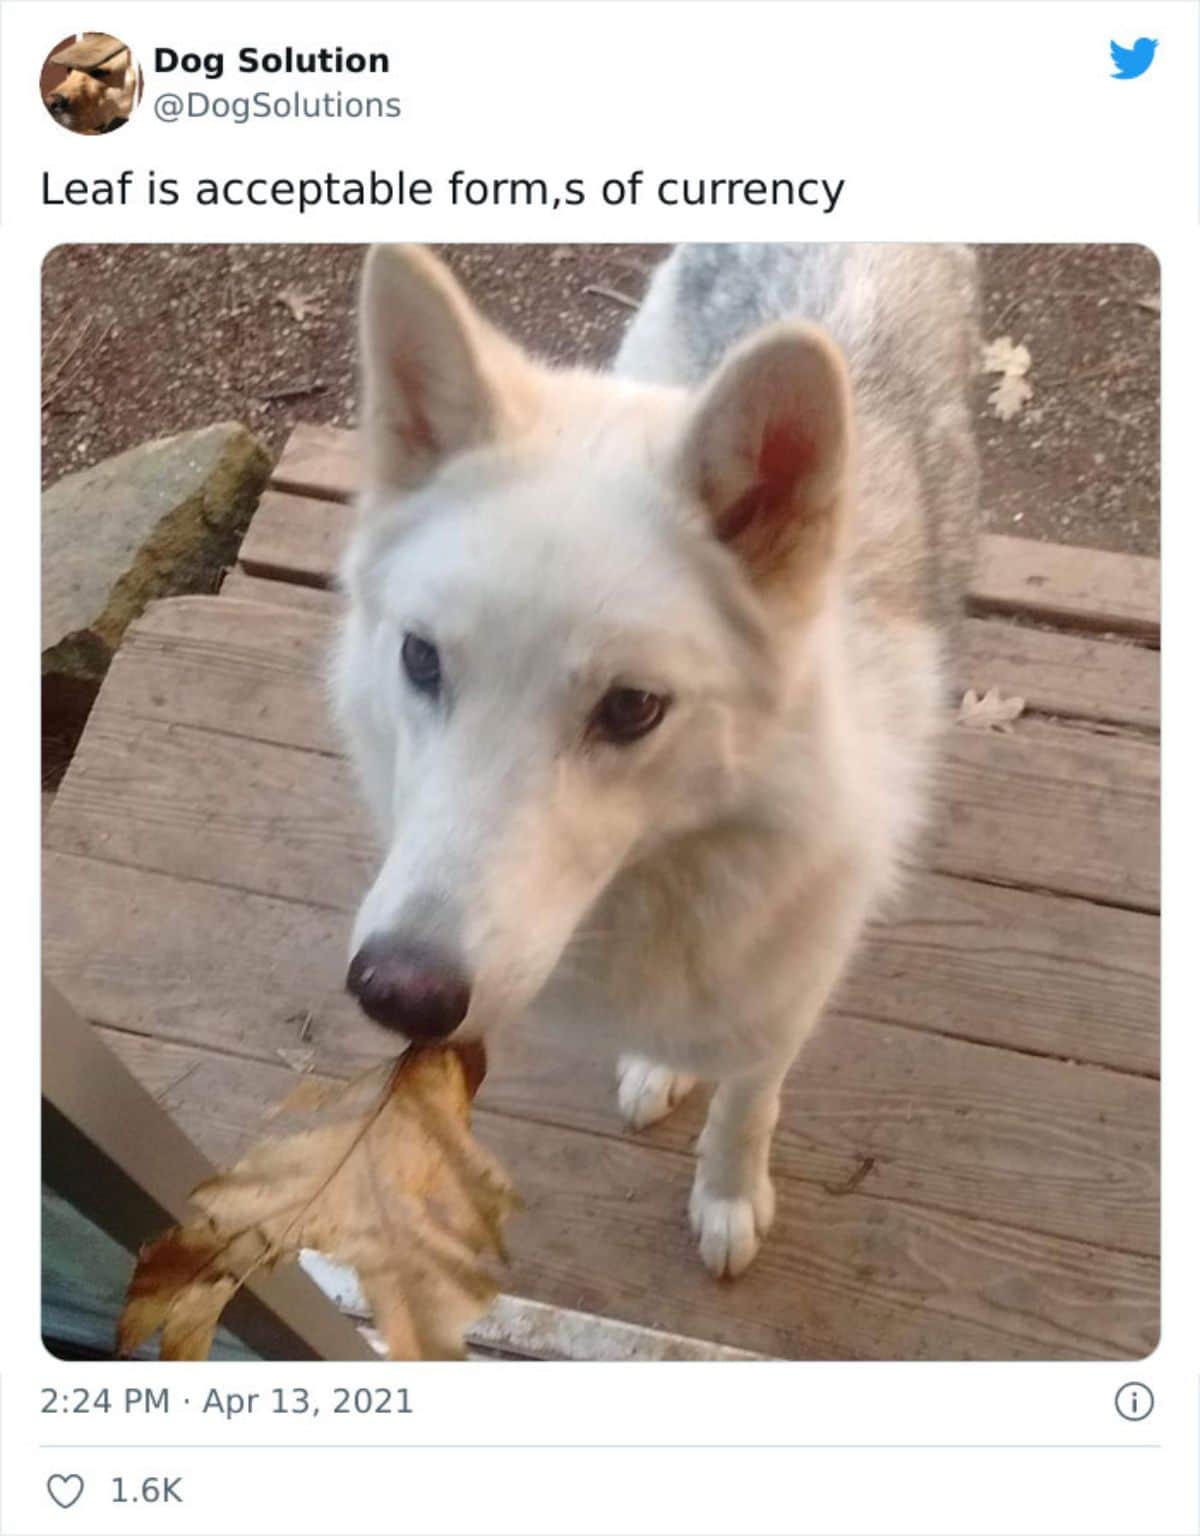 fluffy white dog standing on wooden patio with a brown leaf in its mouth